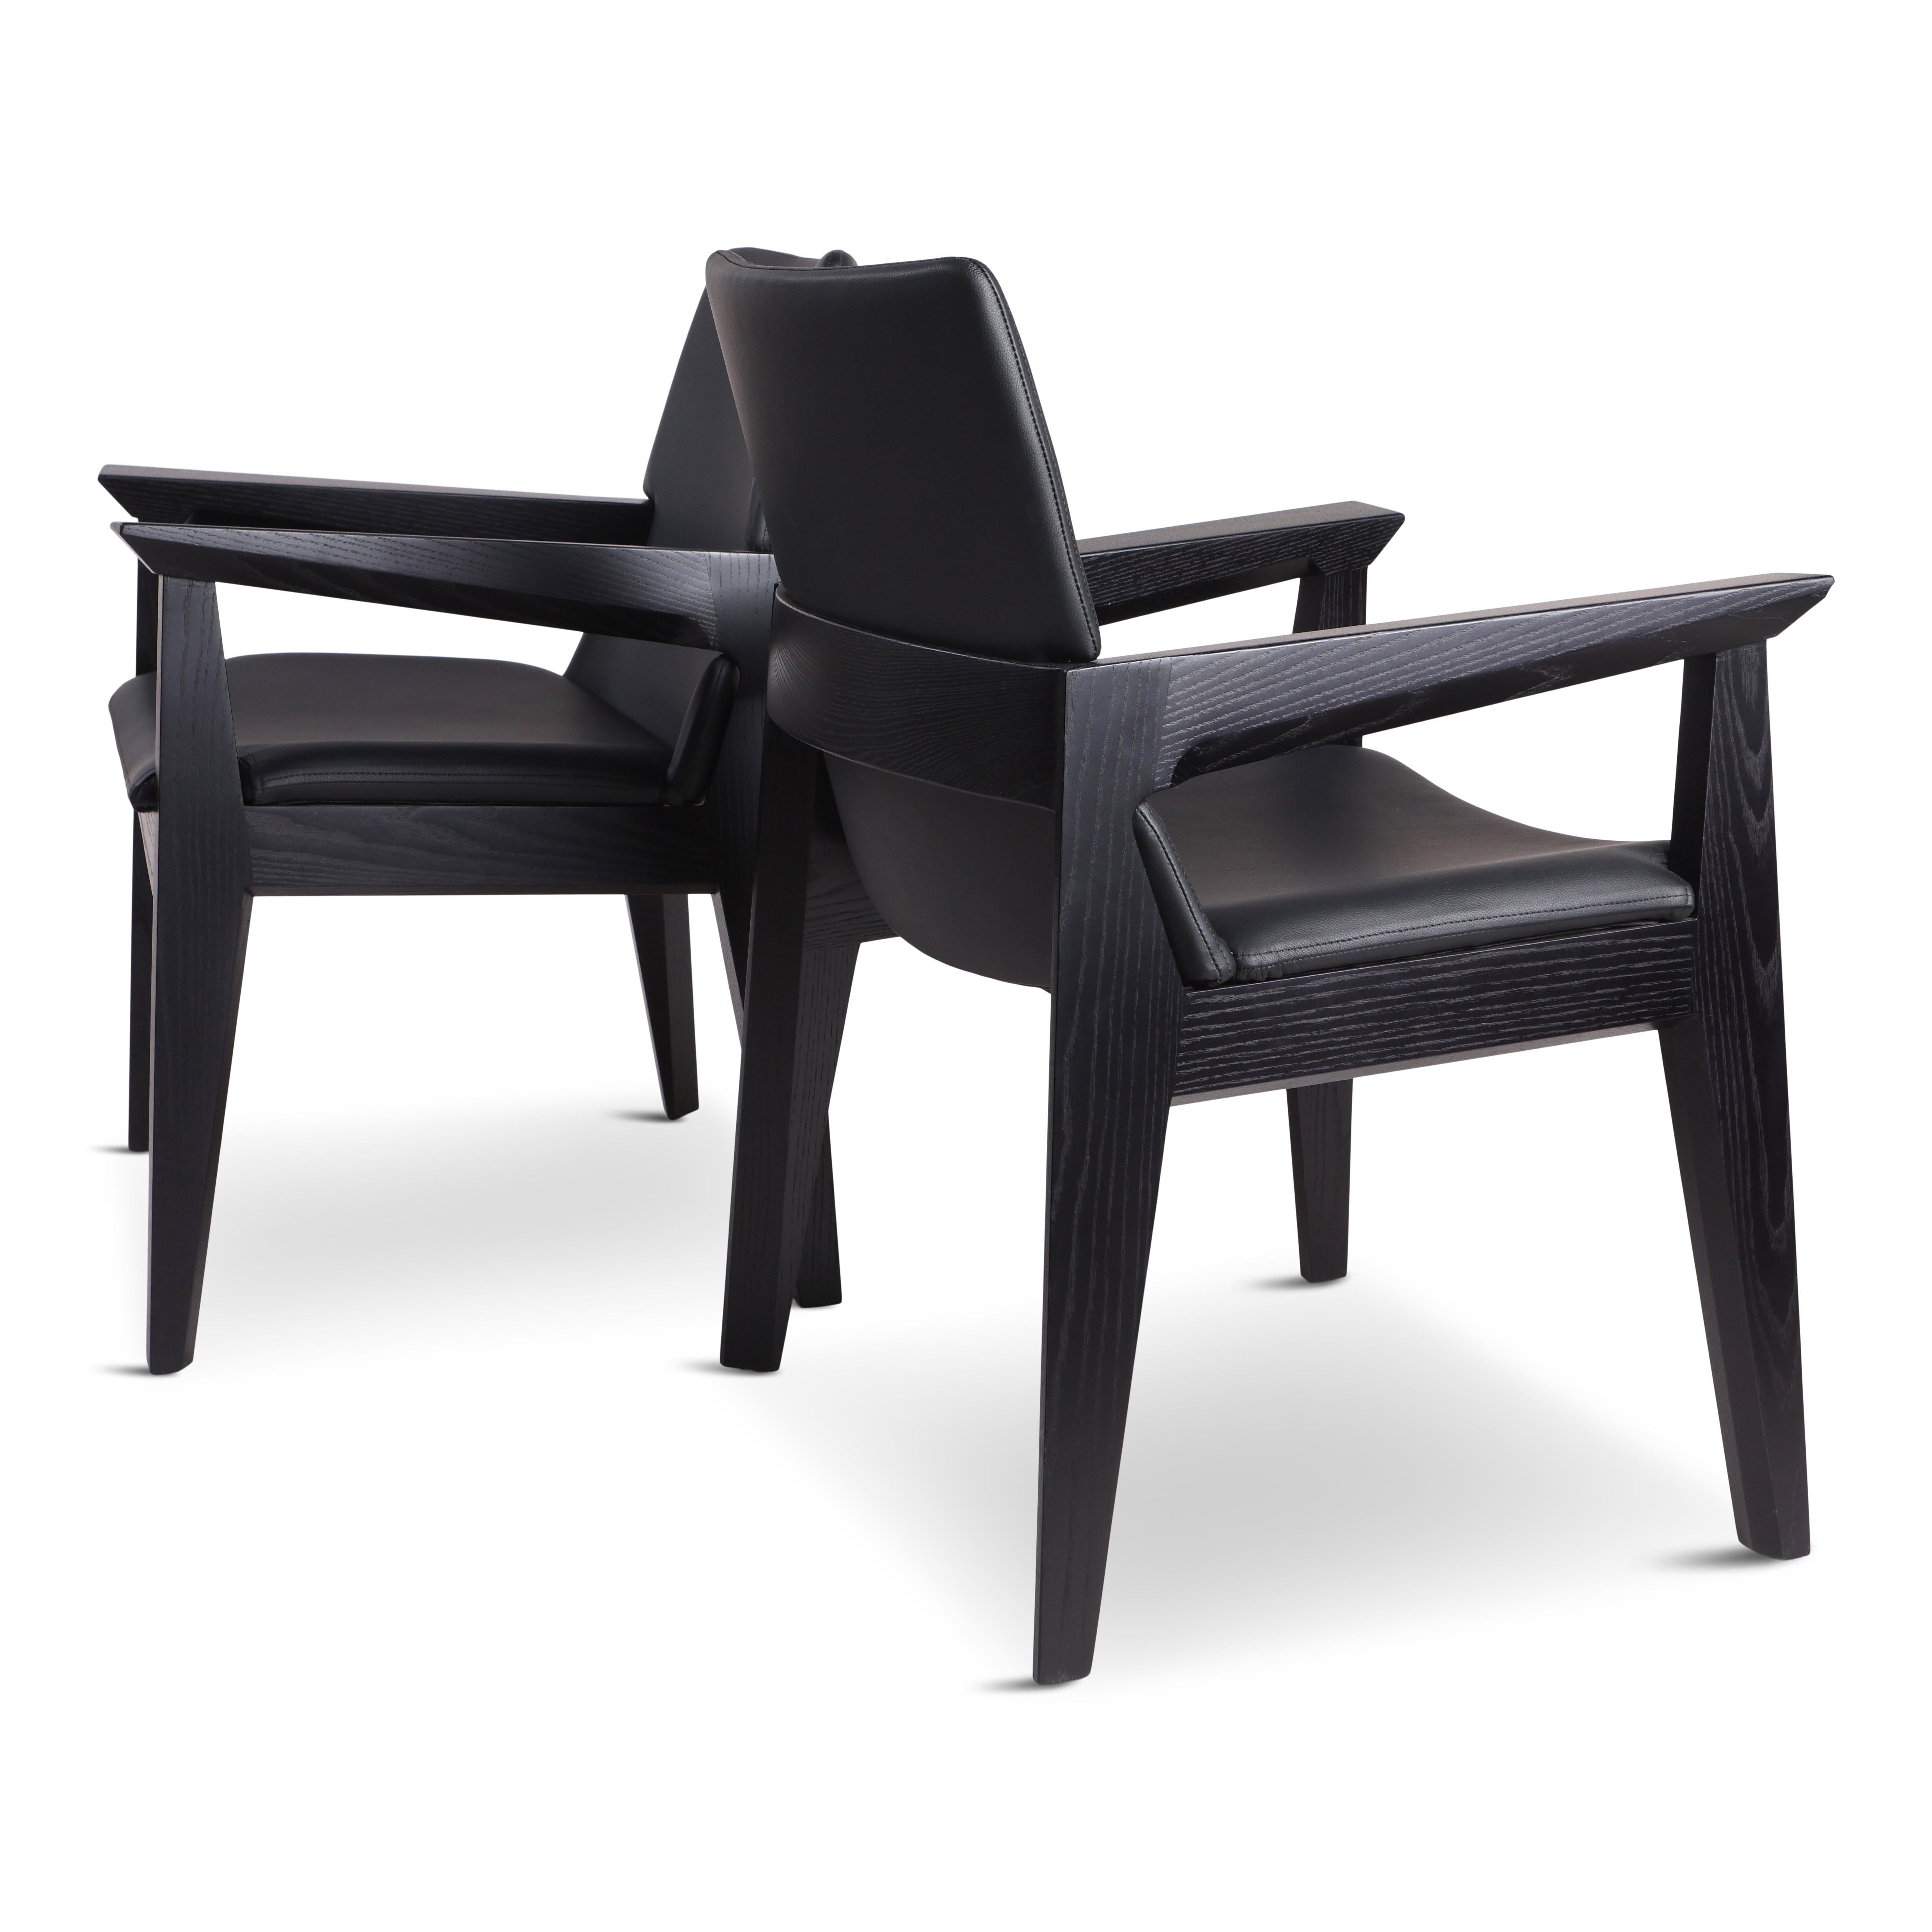 The Kroft arm-chair features a contoured leather seat and backrest set inside a solid-wood frame. Shown in solid Black Ash with flat-grain Italian leather upholstery. 

The Kroft chair is built-to-order. Bespoke options always available. Wood